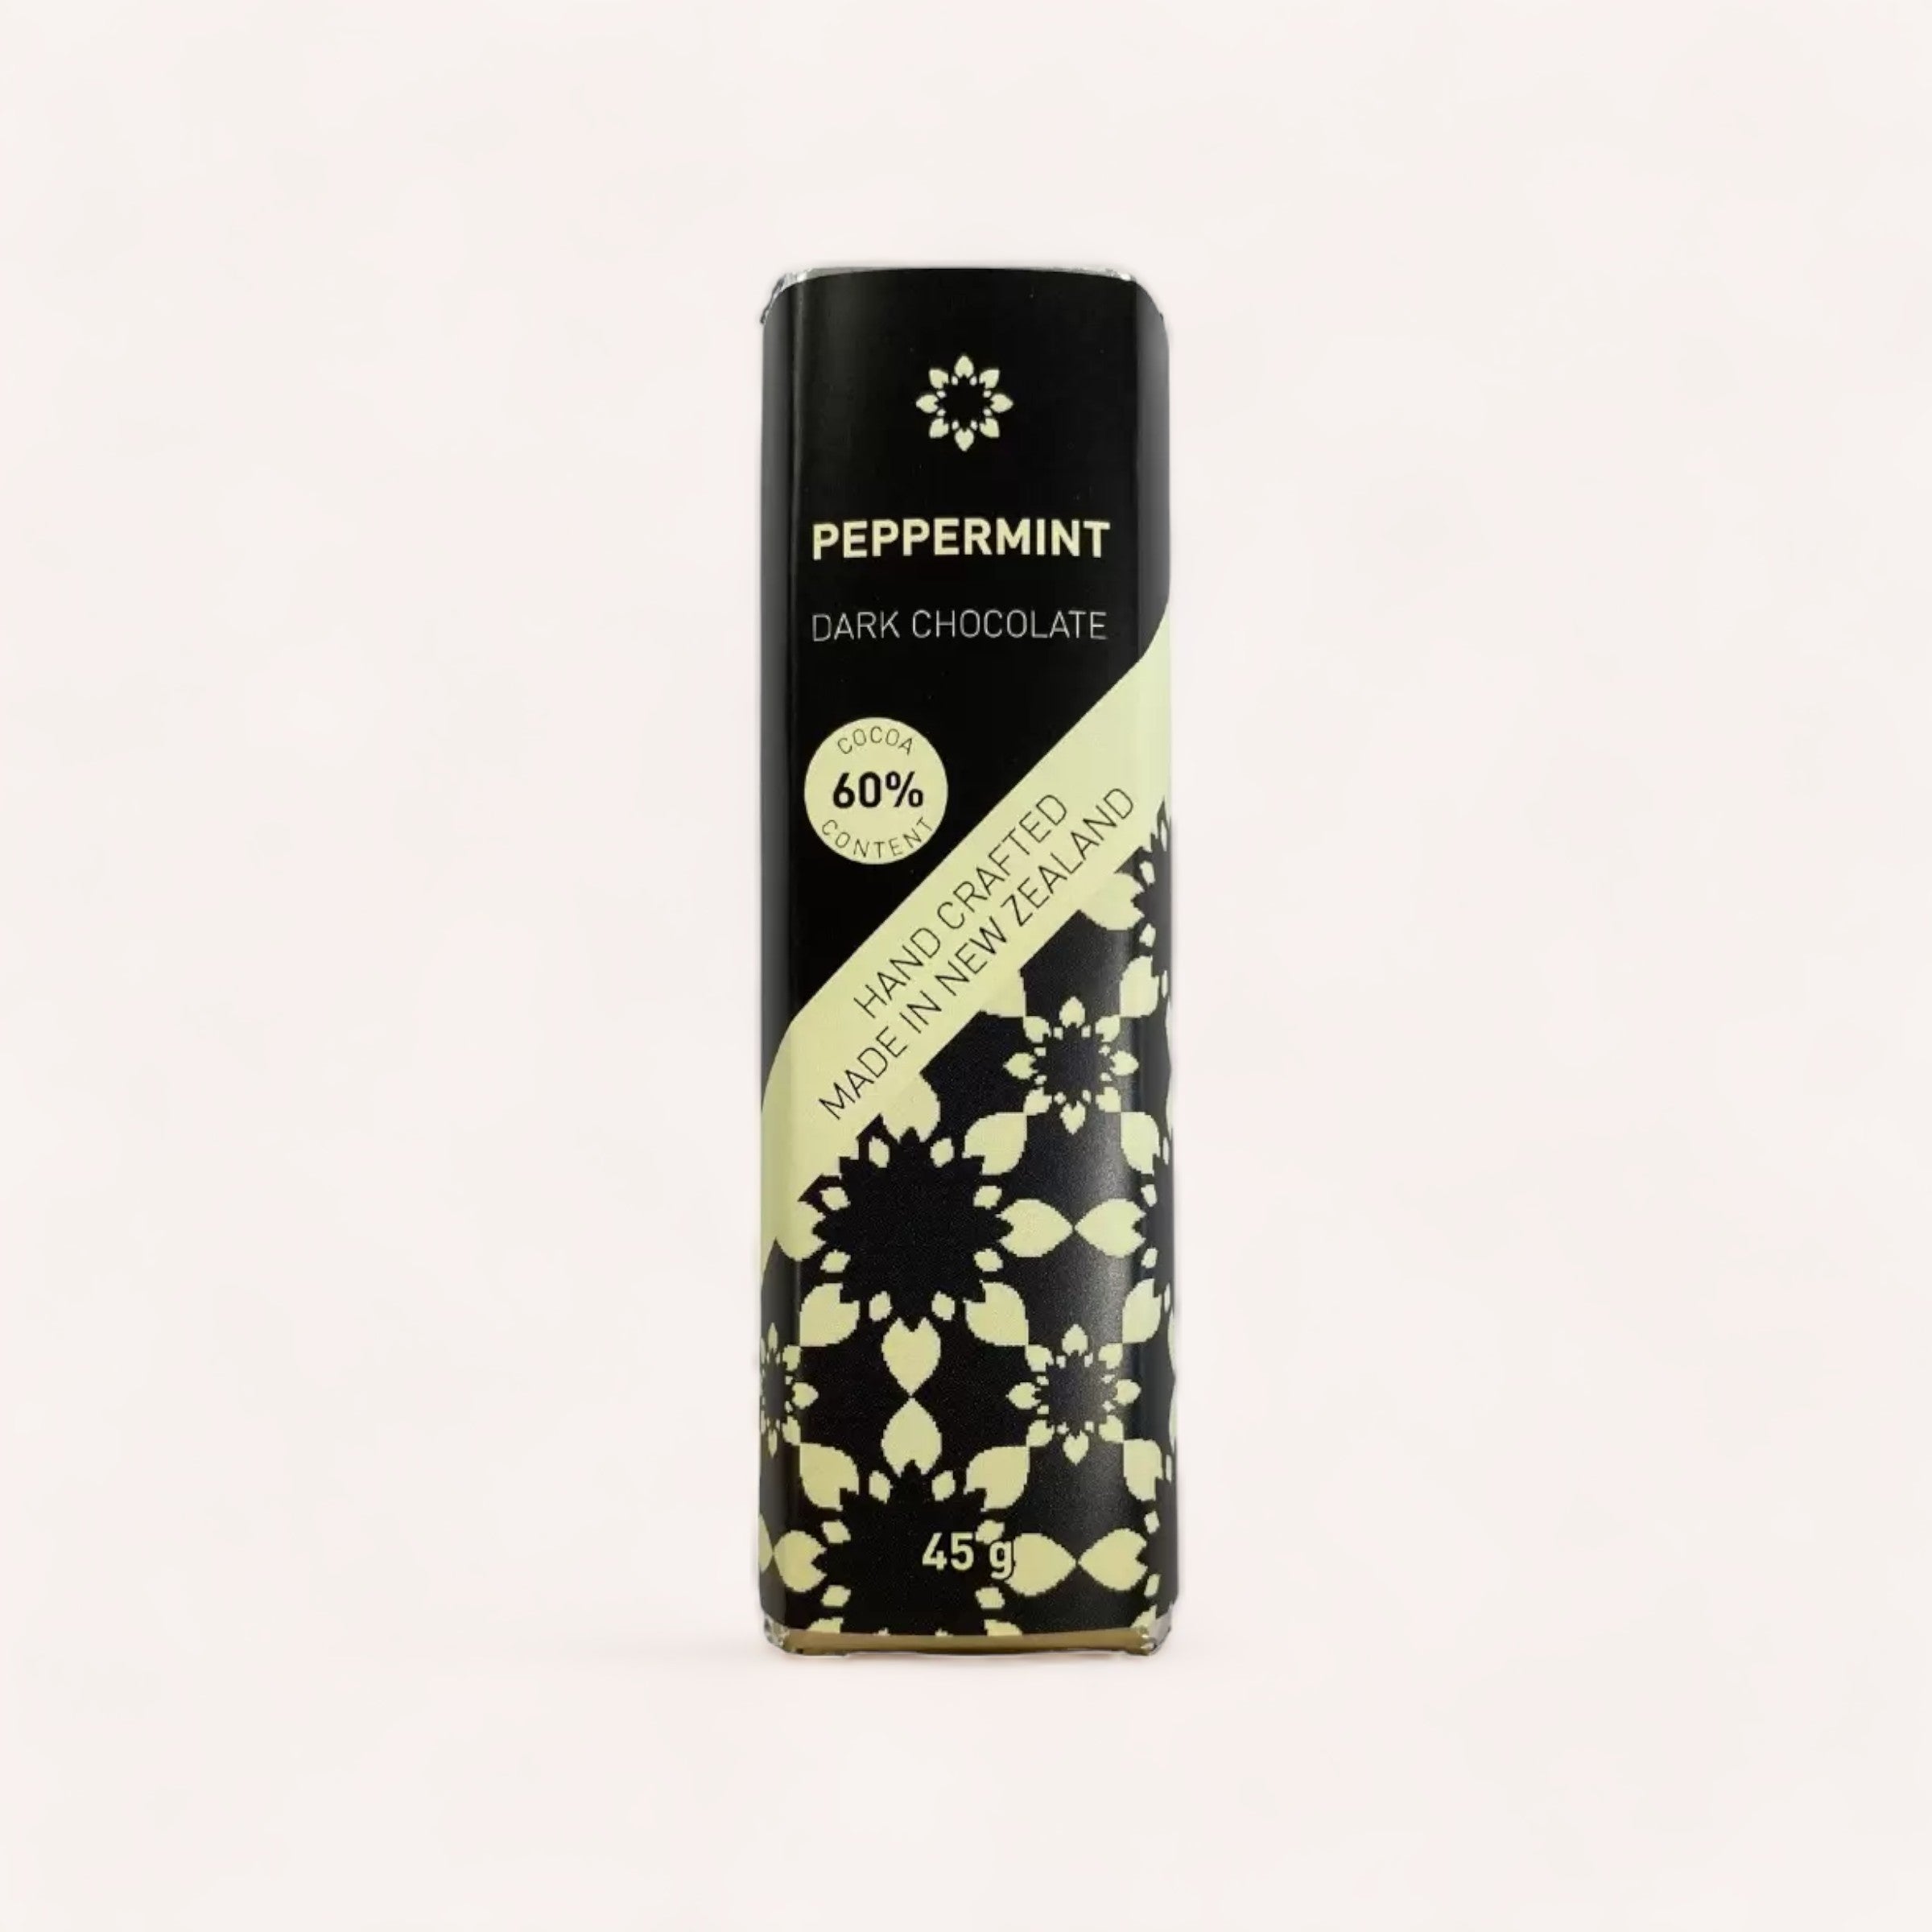 A product of New Zealand, the Peppermint Chocolate bar by Chocolate Traders with 60% cacao content is handcrafted and vegan, wrapped in elegant black packaging with floral patterns, weighing 45g.